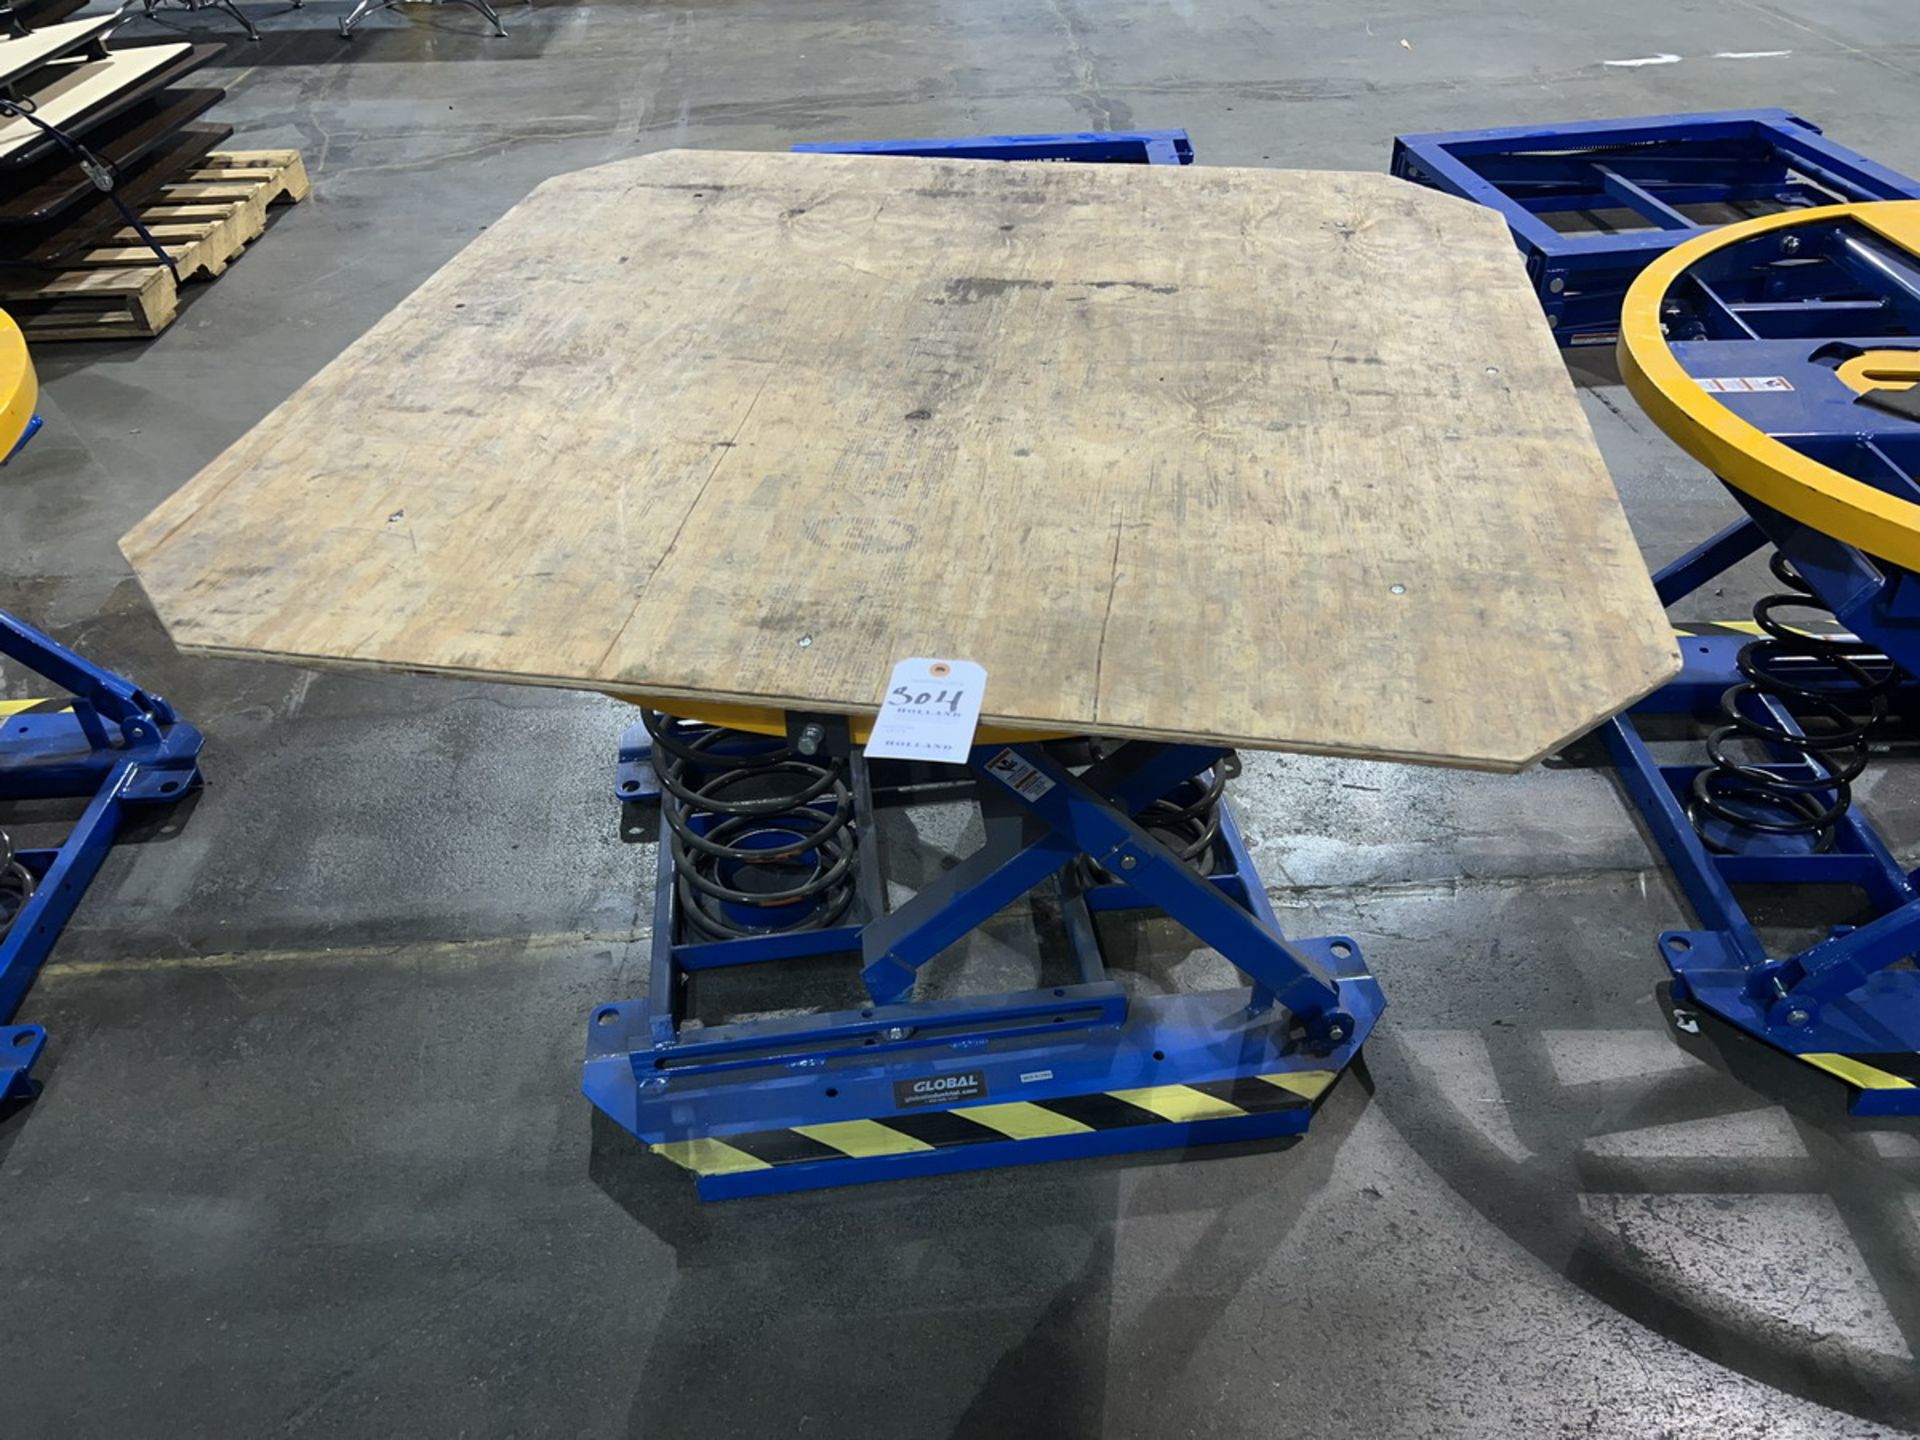 Global 4500Lb. 44" Spring Loaded Rotary Lift Table